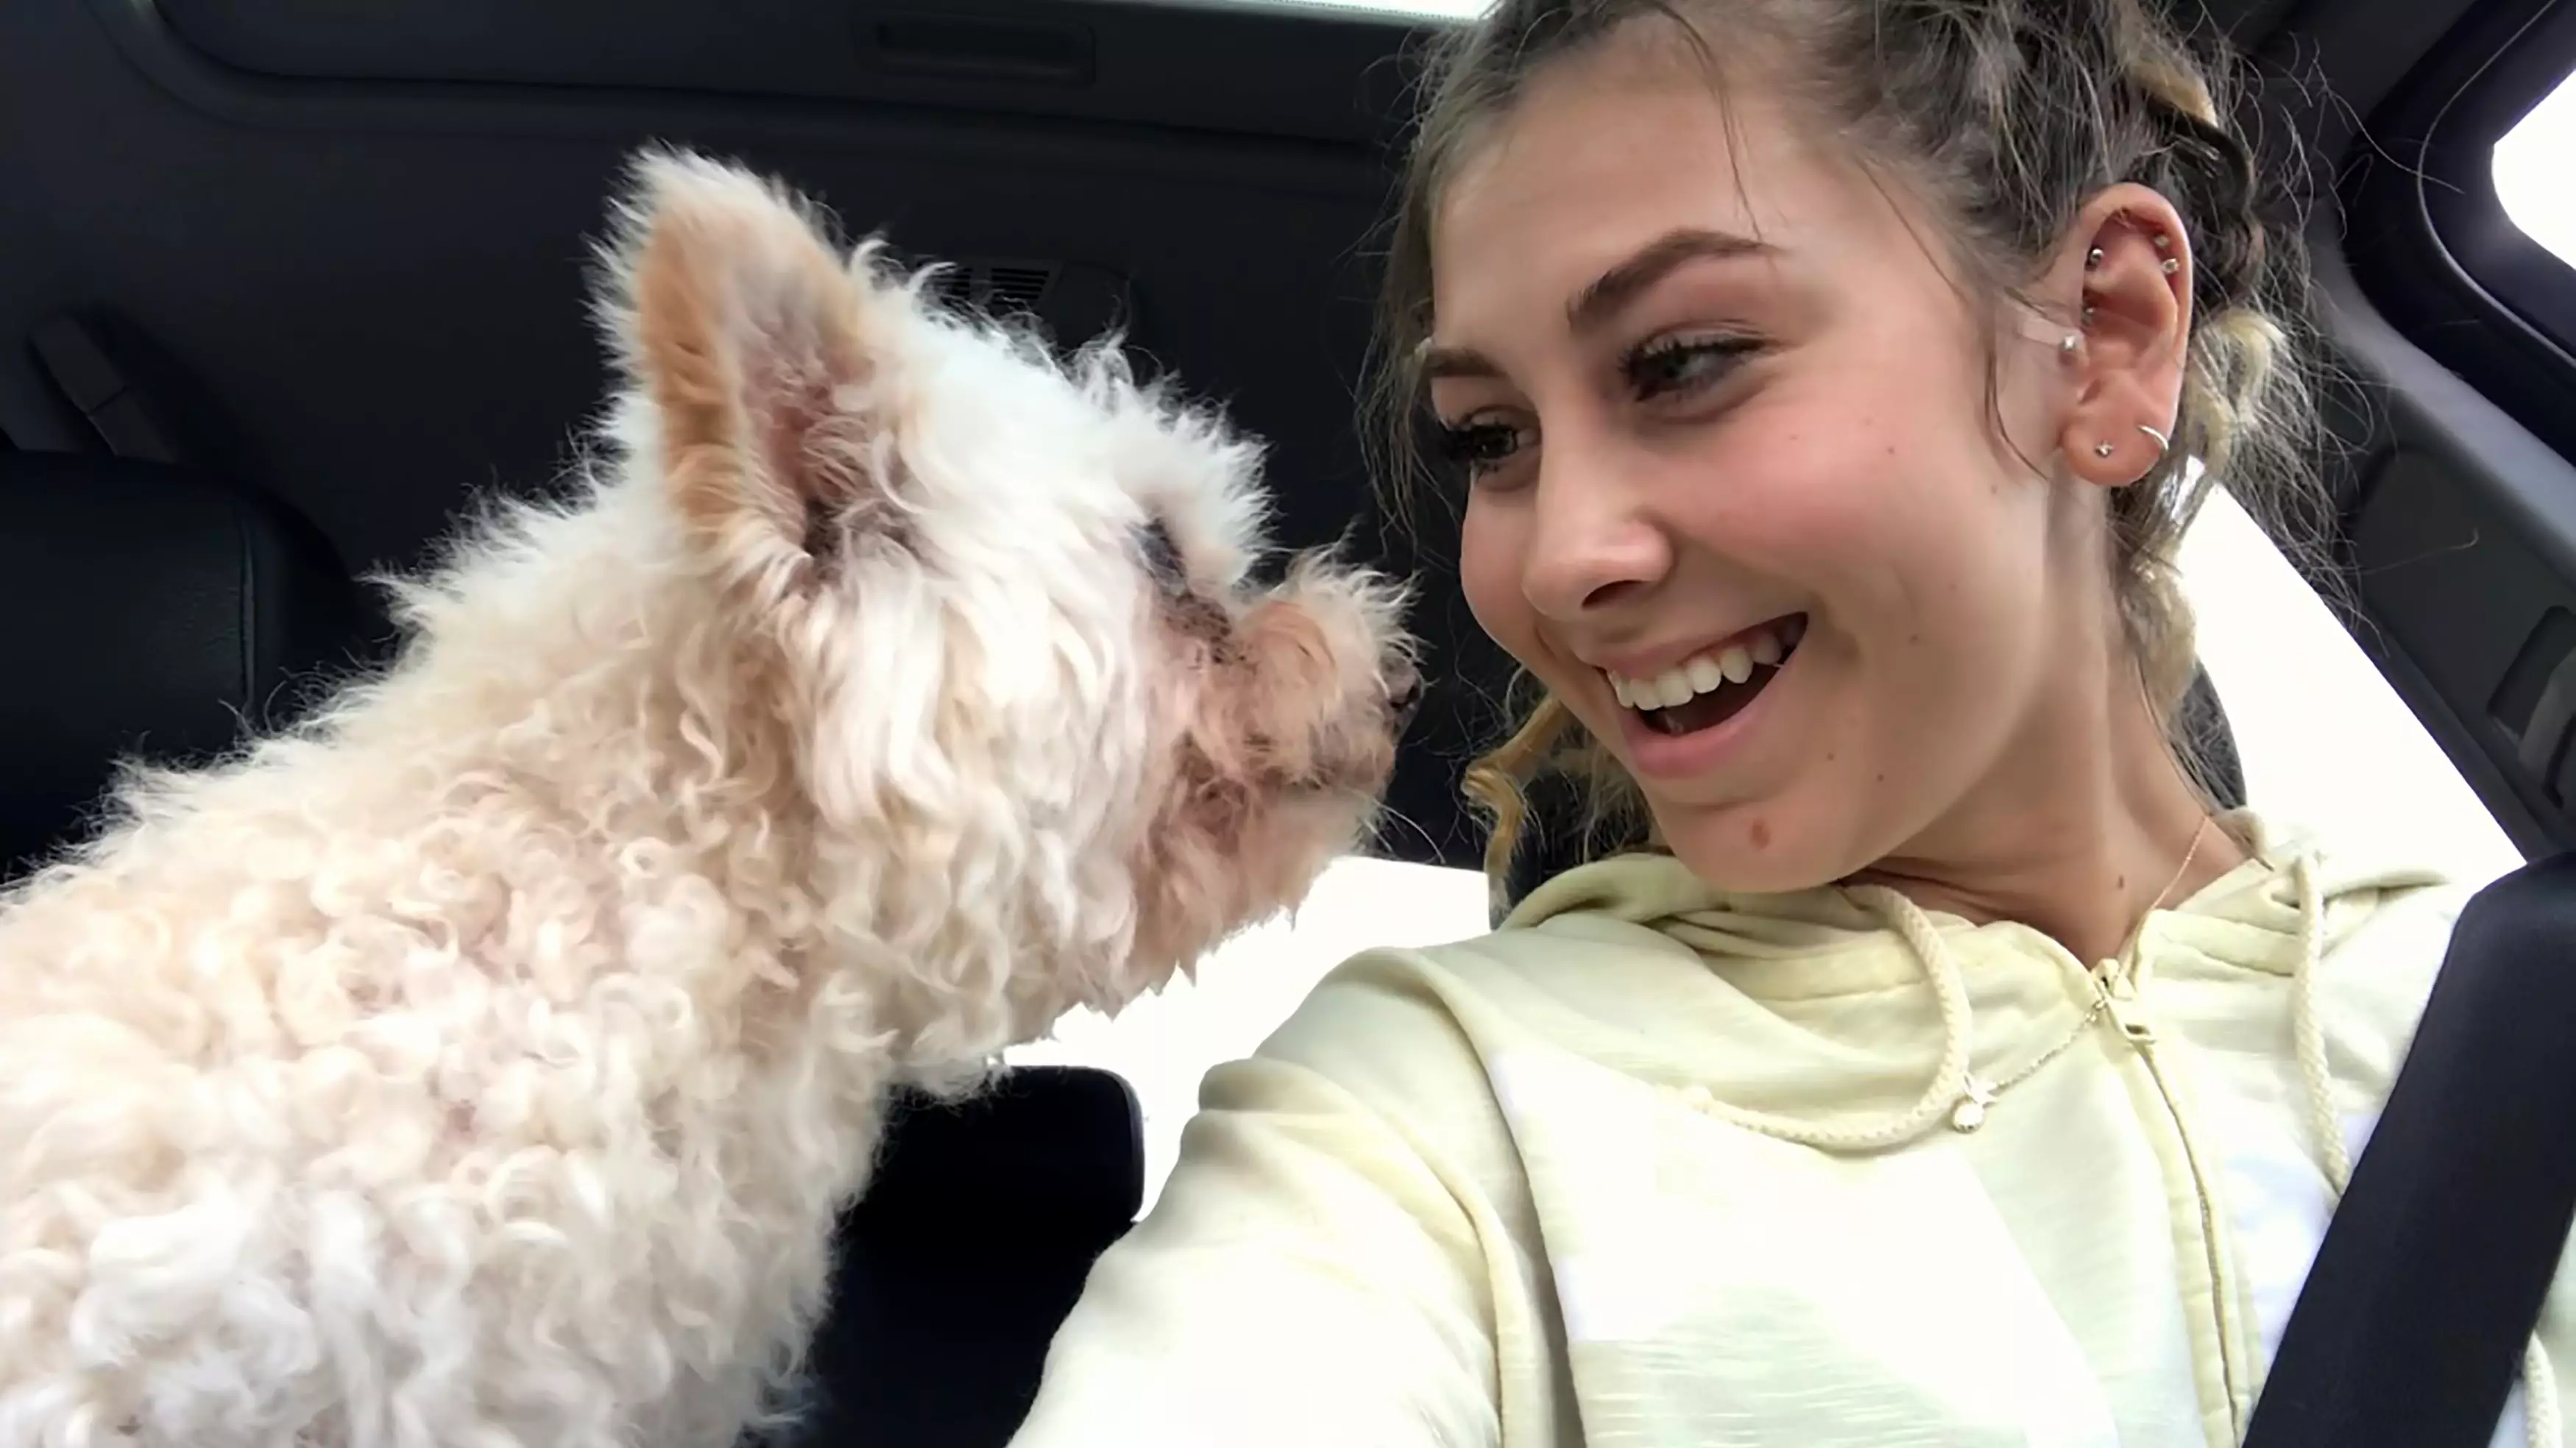 Dog Owner's Tear-Jerking Video Of 18-Year-Old Dog's Final Day